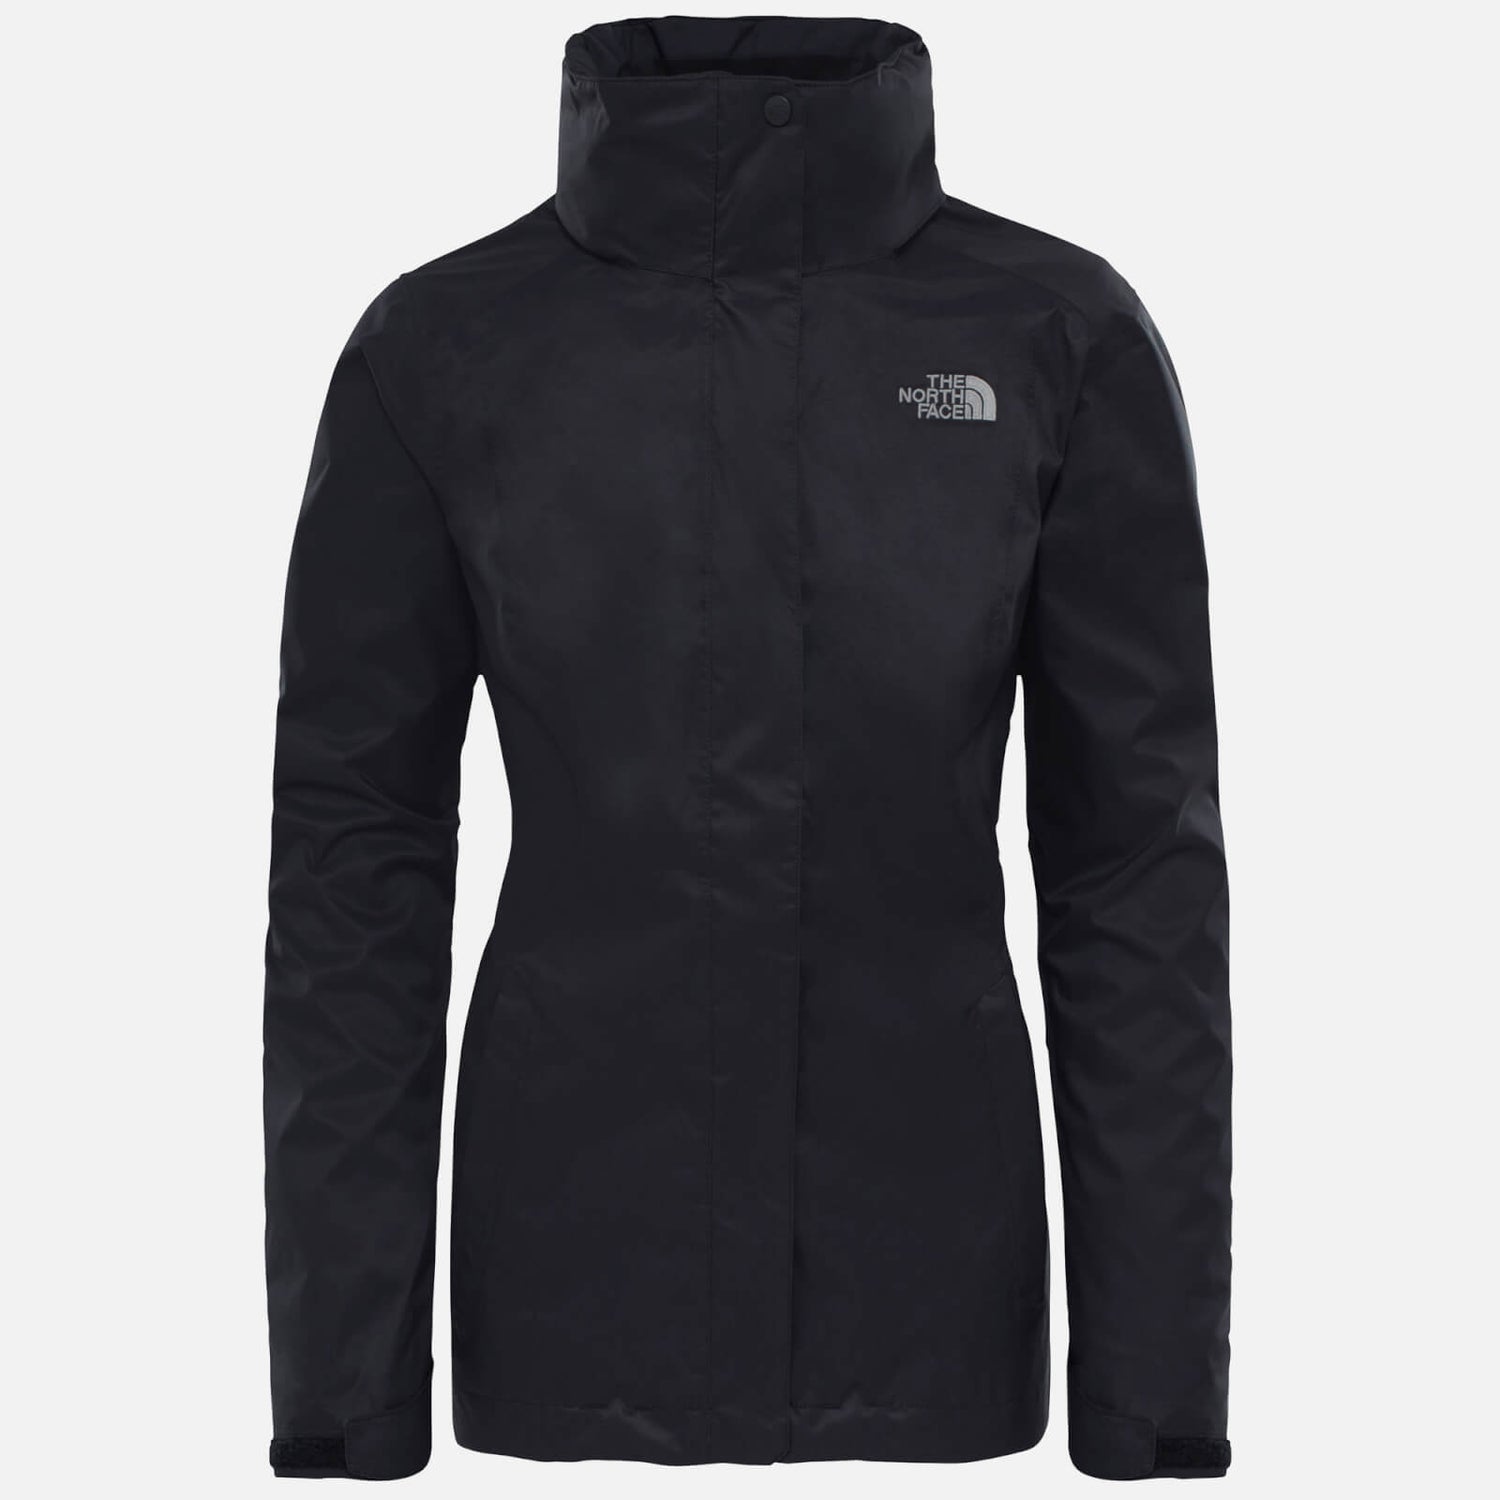 The North Face Women's Evolve Ii Triclimate Jacket - Black - XS